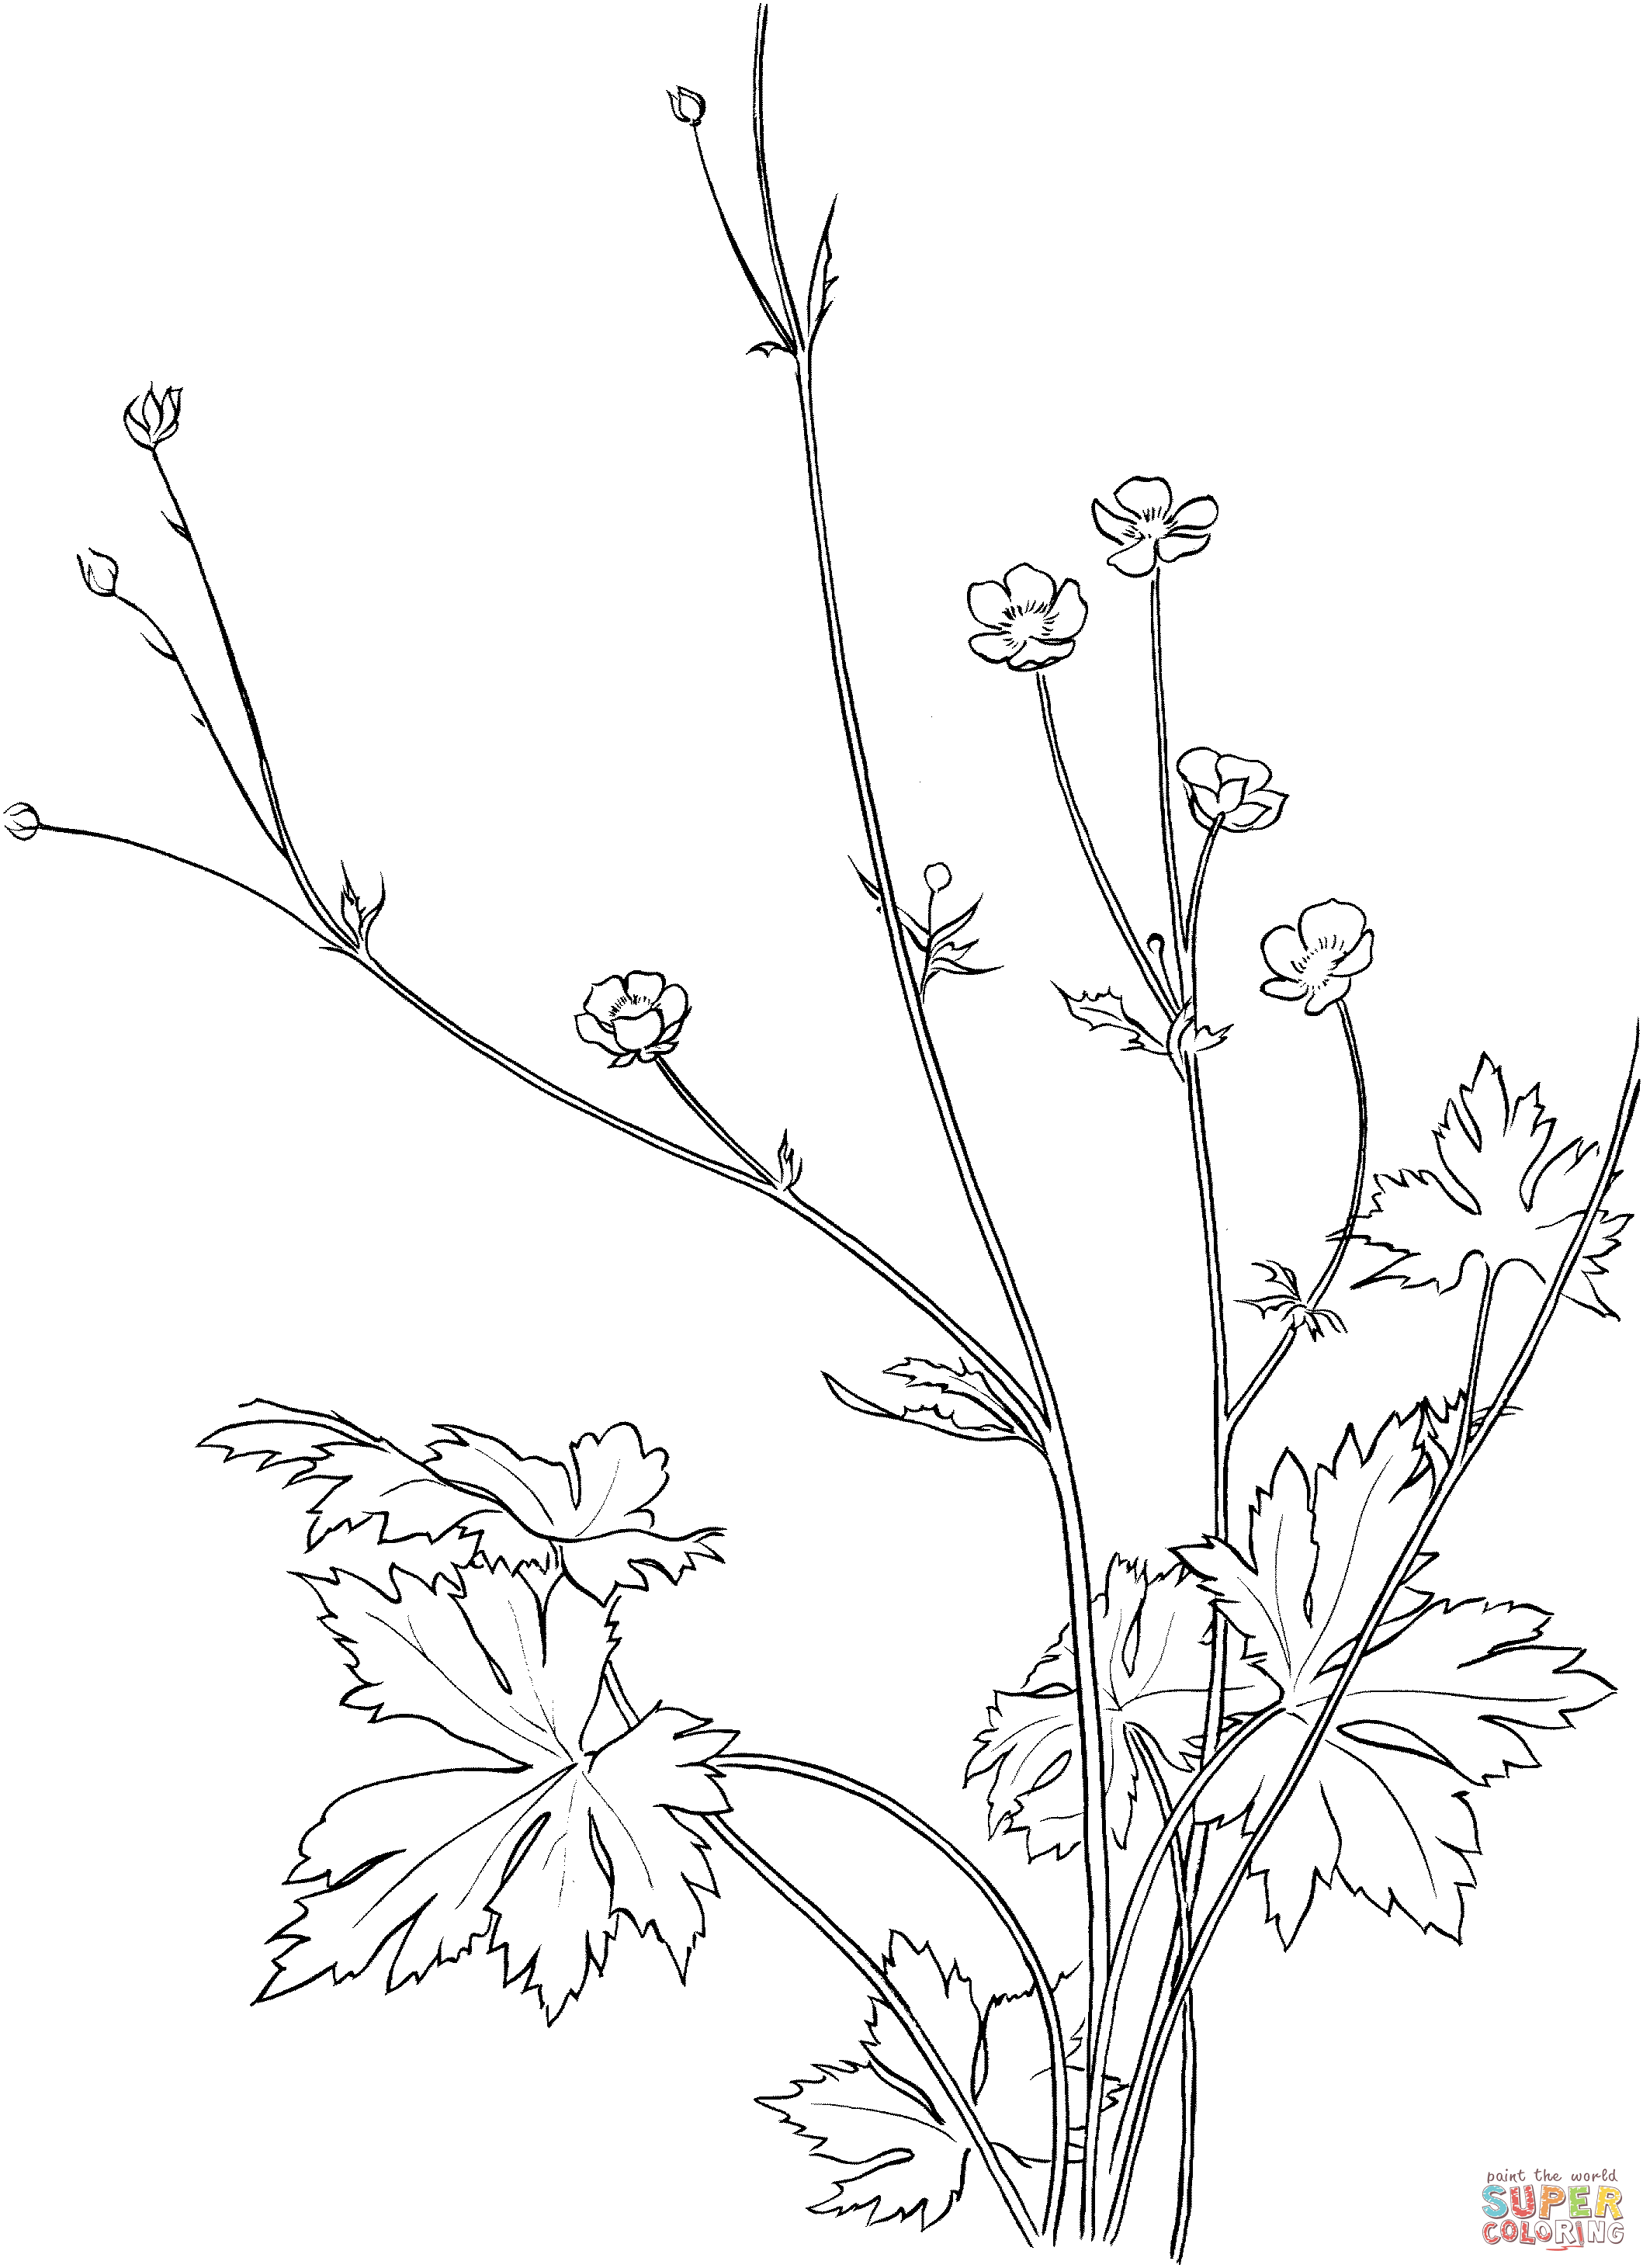 Buttercup coloring pages | Free Coloring Pages